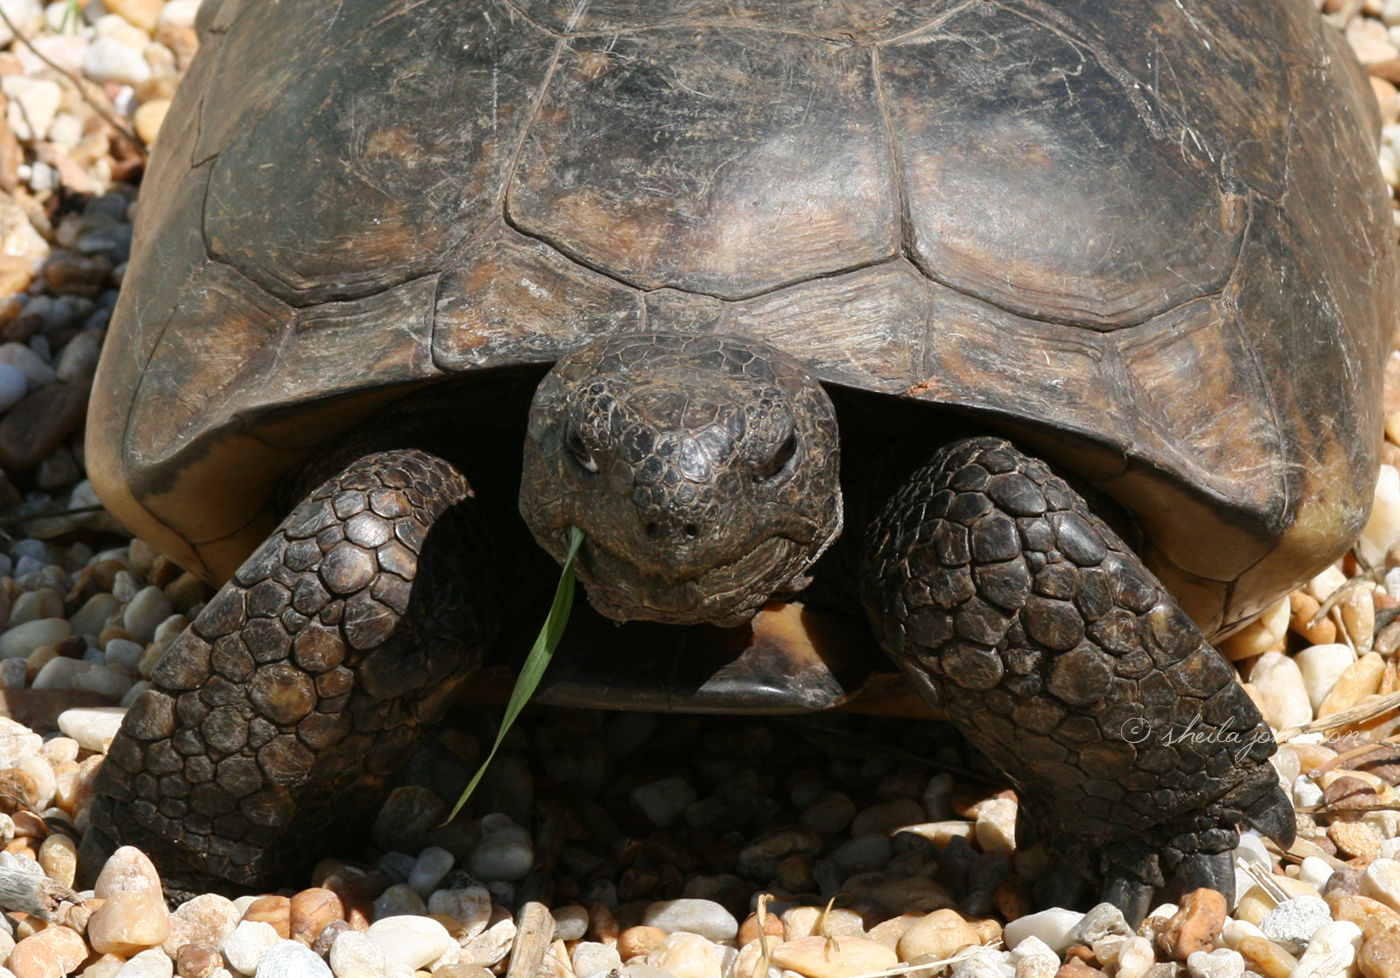 You&#039;Ve Got Something Stuck In Your Teeth There, Mr. Grumpy Gopher Tortoise! The Gopher Tortoise Shares Its Burrow With More Than 350 Other Animal Species, Thus It&#039;S Referred To As A &#039;Keystone&#039; Species.